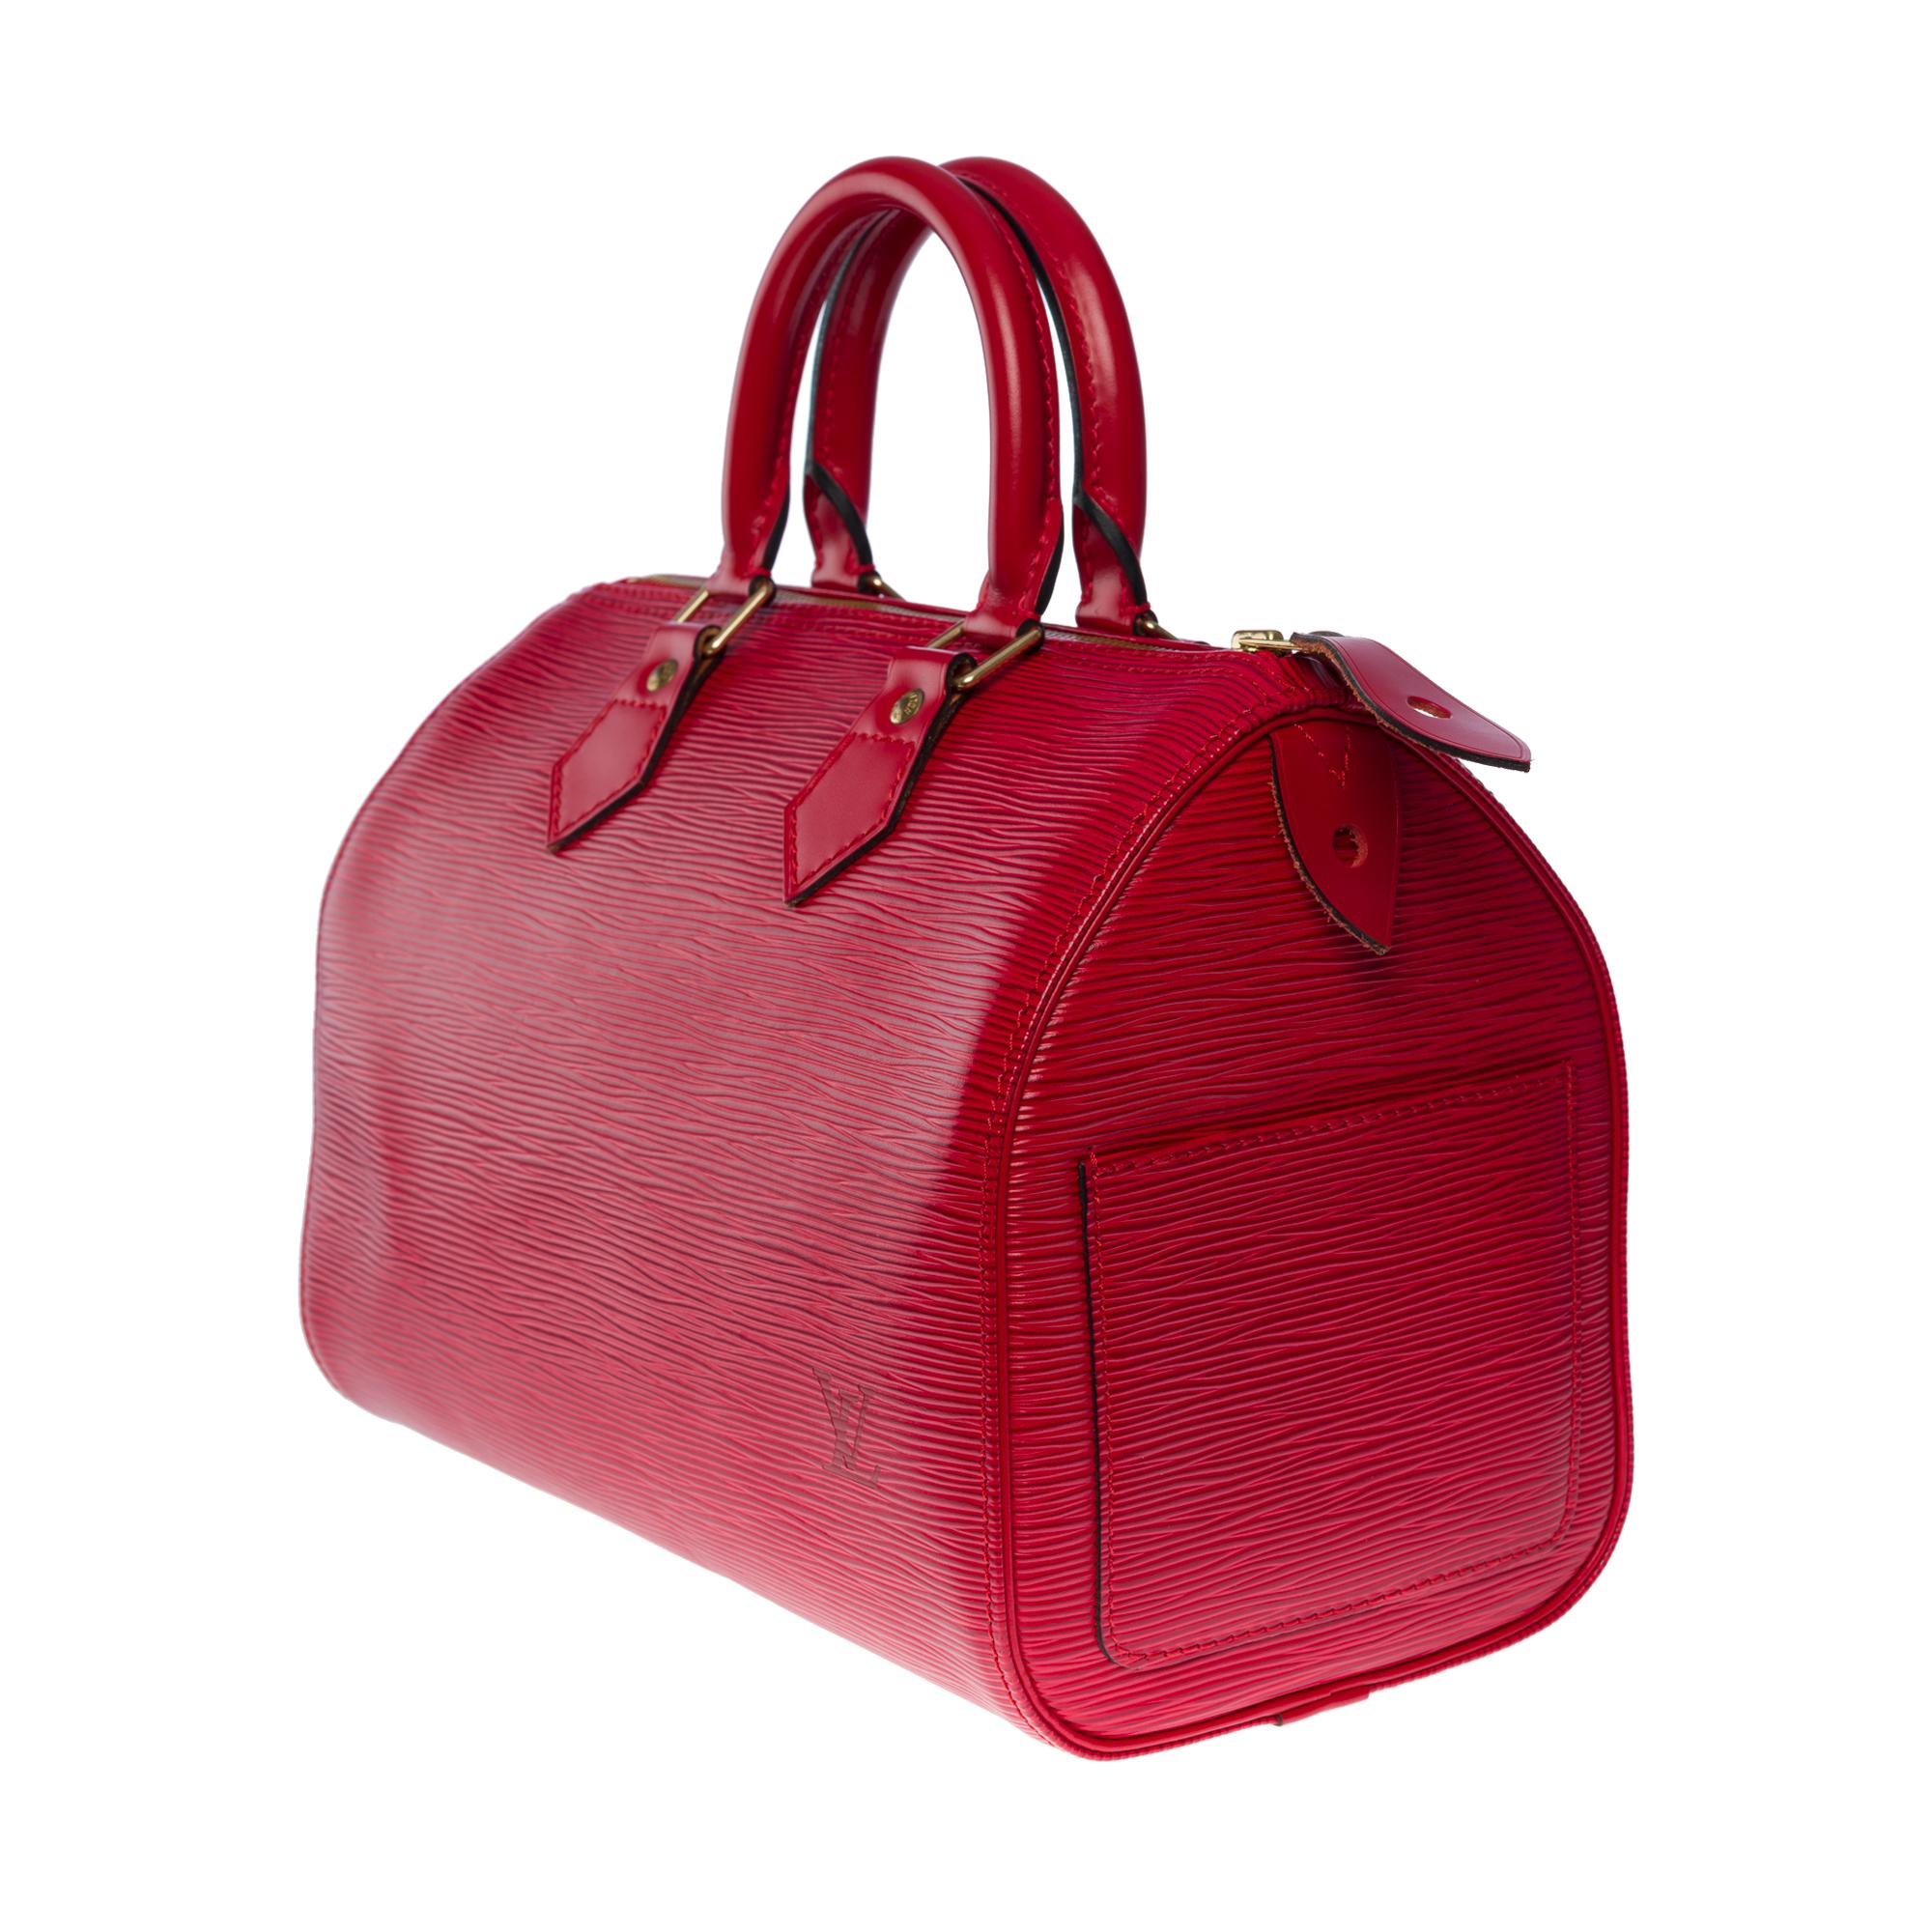 Women's or Men's Gorgeous Louis Vuitton Speedy 25 handbag in red epi leather and gold hardware